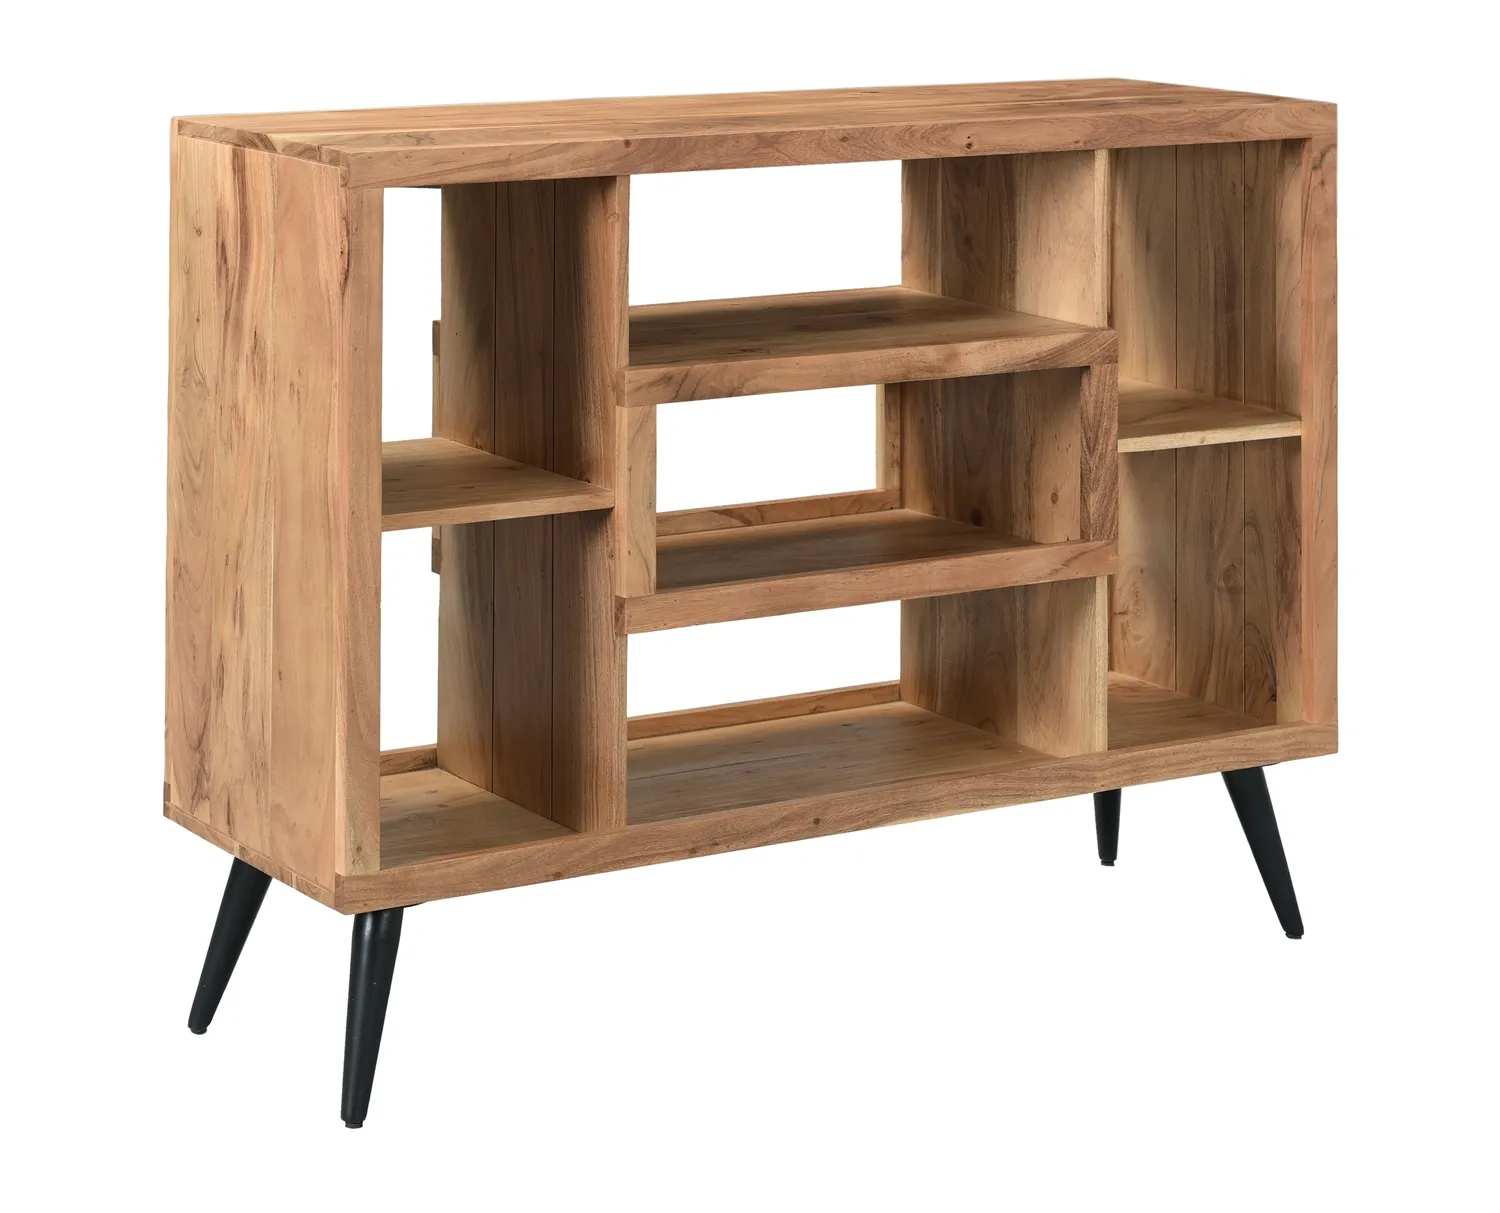 BELLAMY SOLID ACACIA WOOD BOOKCASE WITH SEVEN SHELVES AND METAL TAPERED LEGS